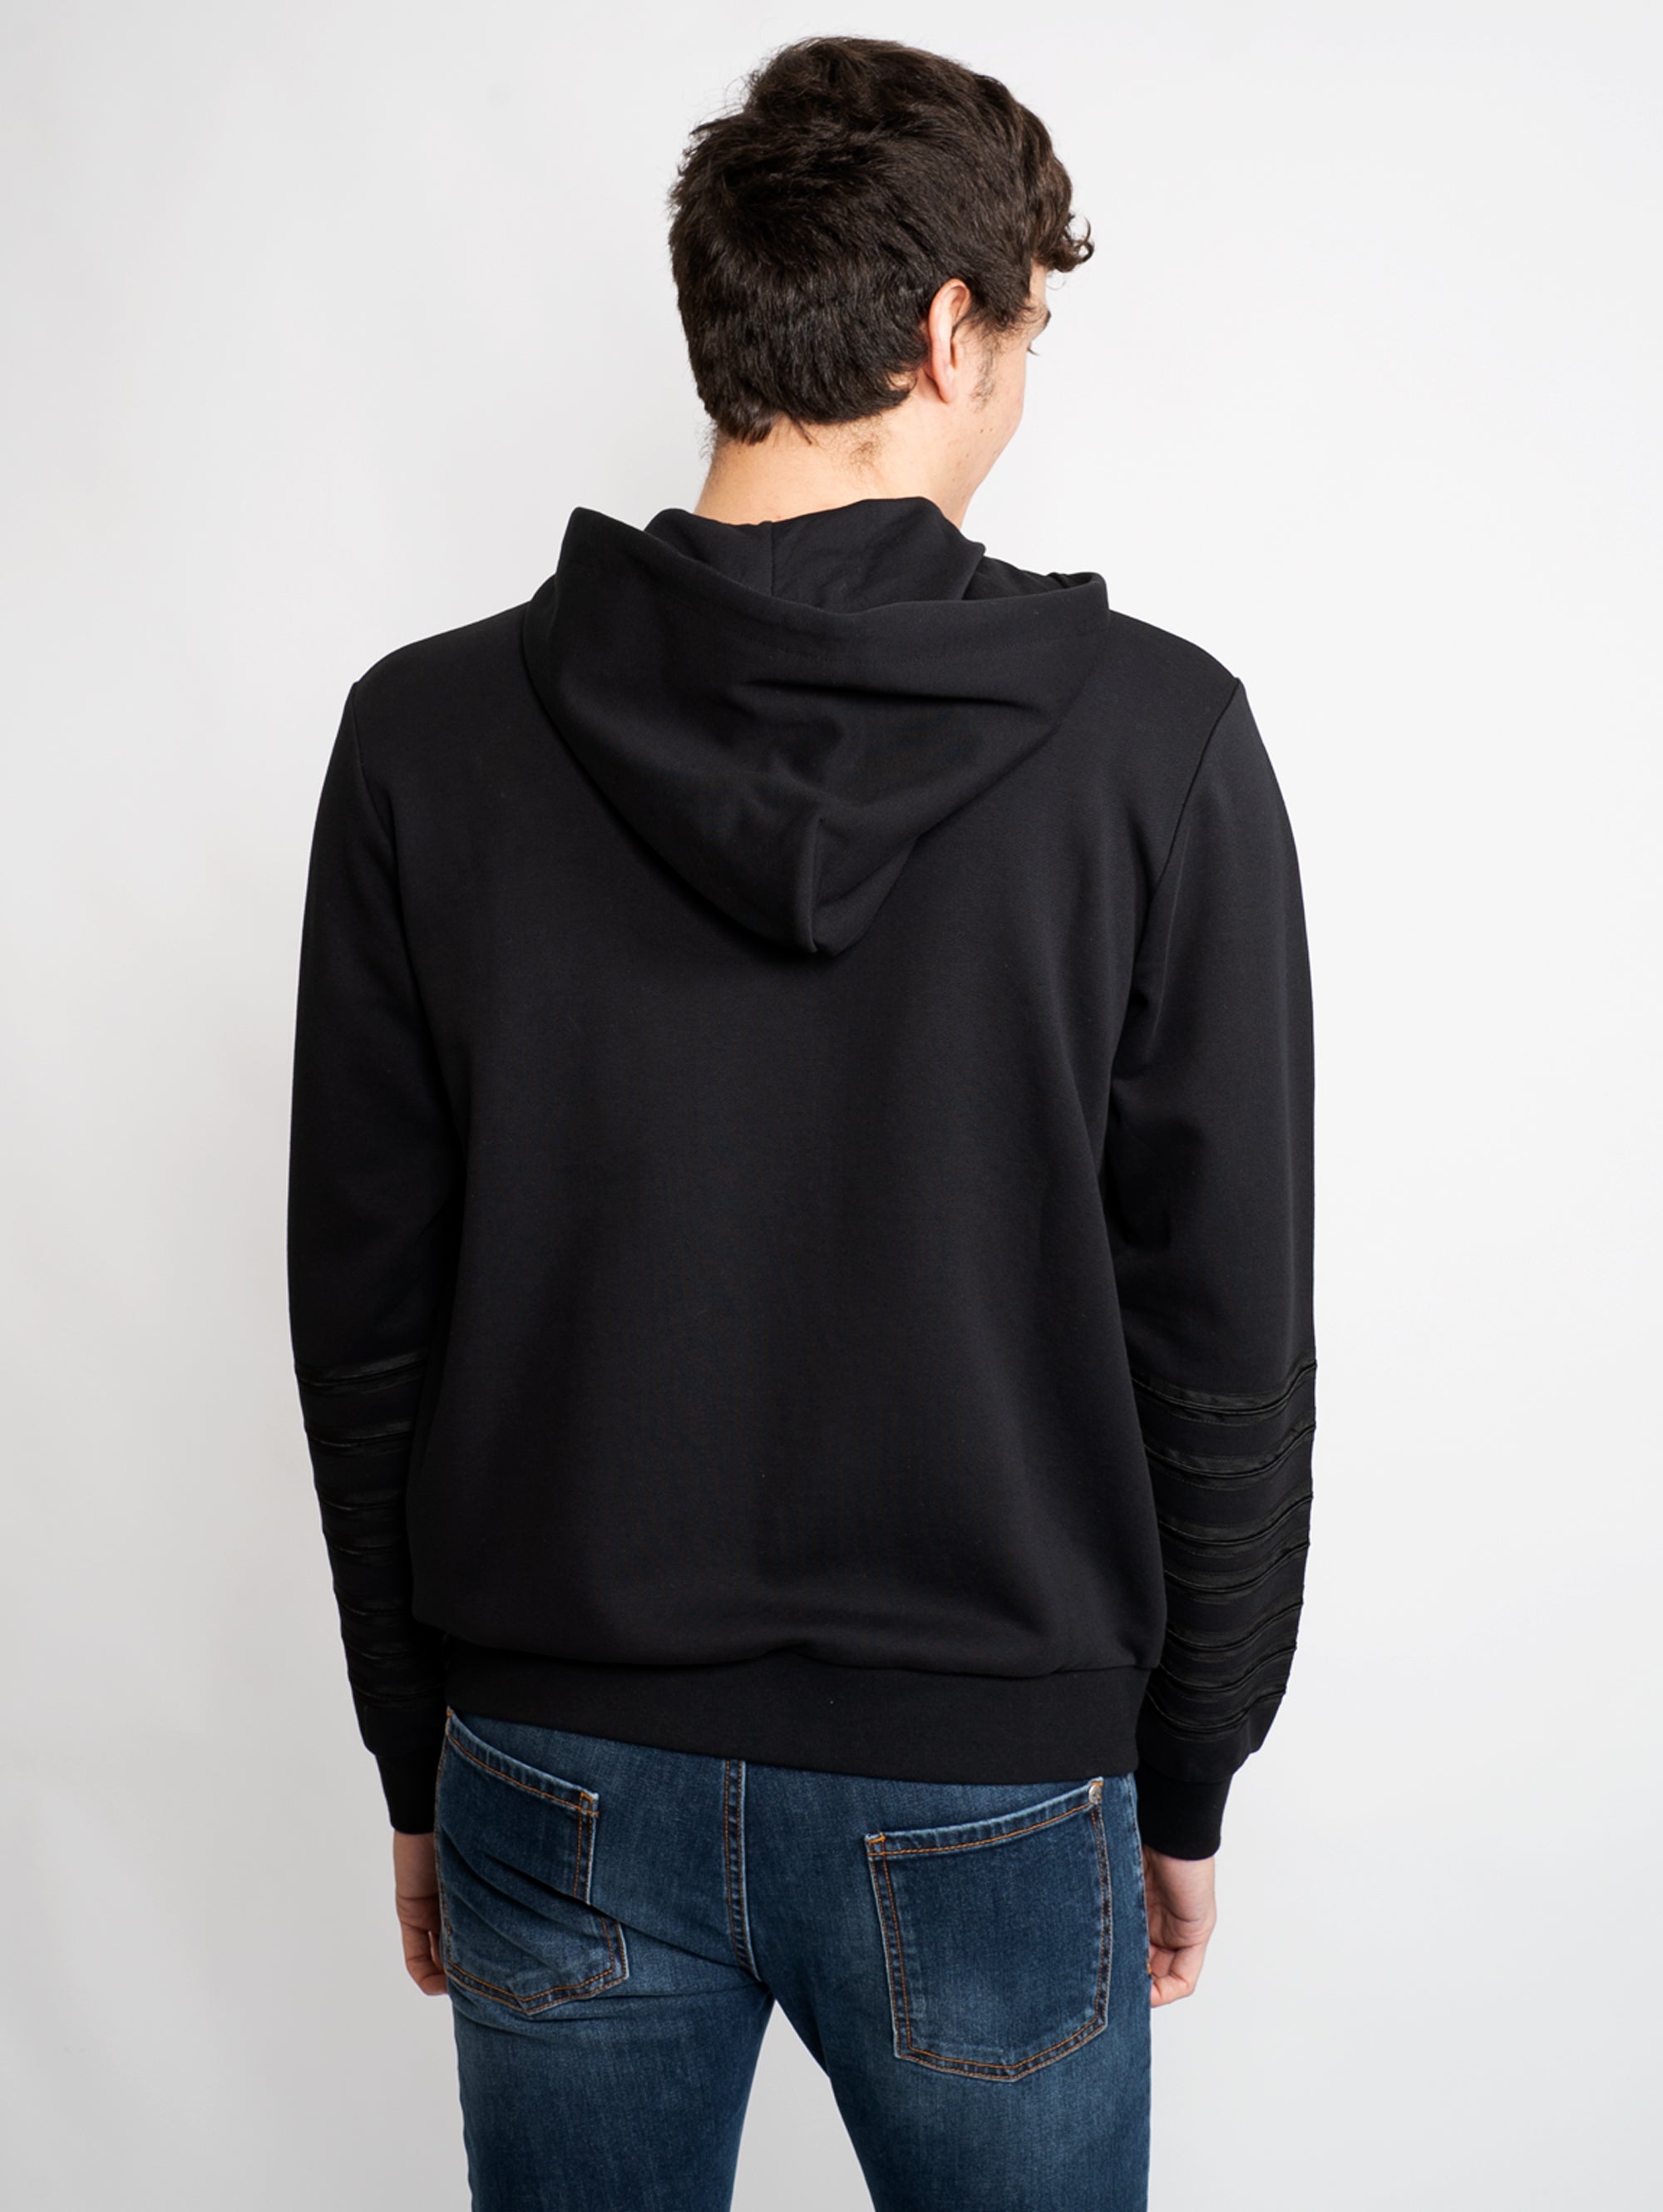 Sweatshirt with Applied Buttons Black